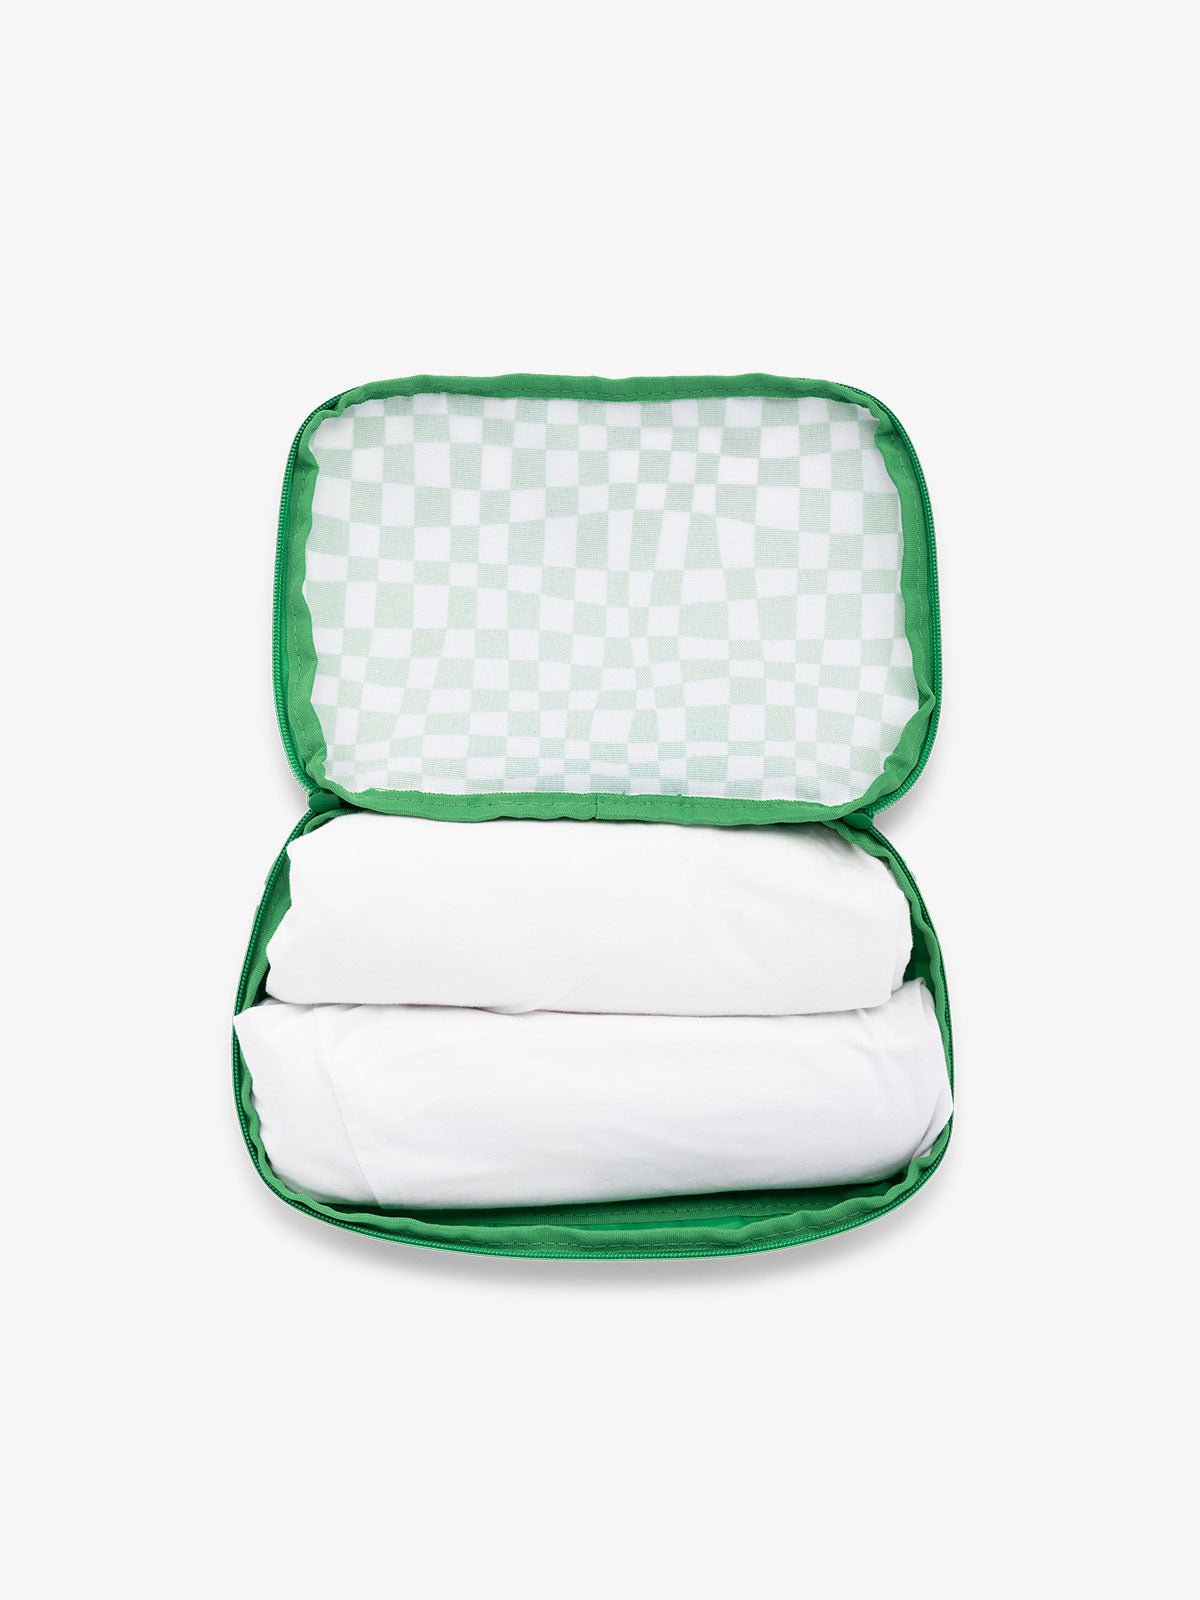 CALPAK small packing cubes for travel made with durable material in green and white checkerboard print